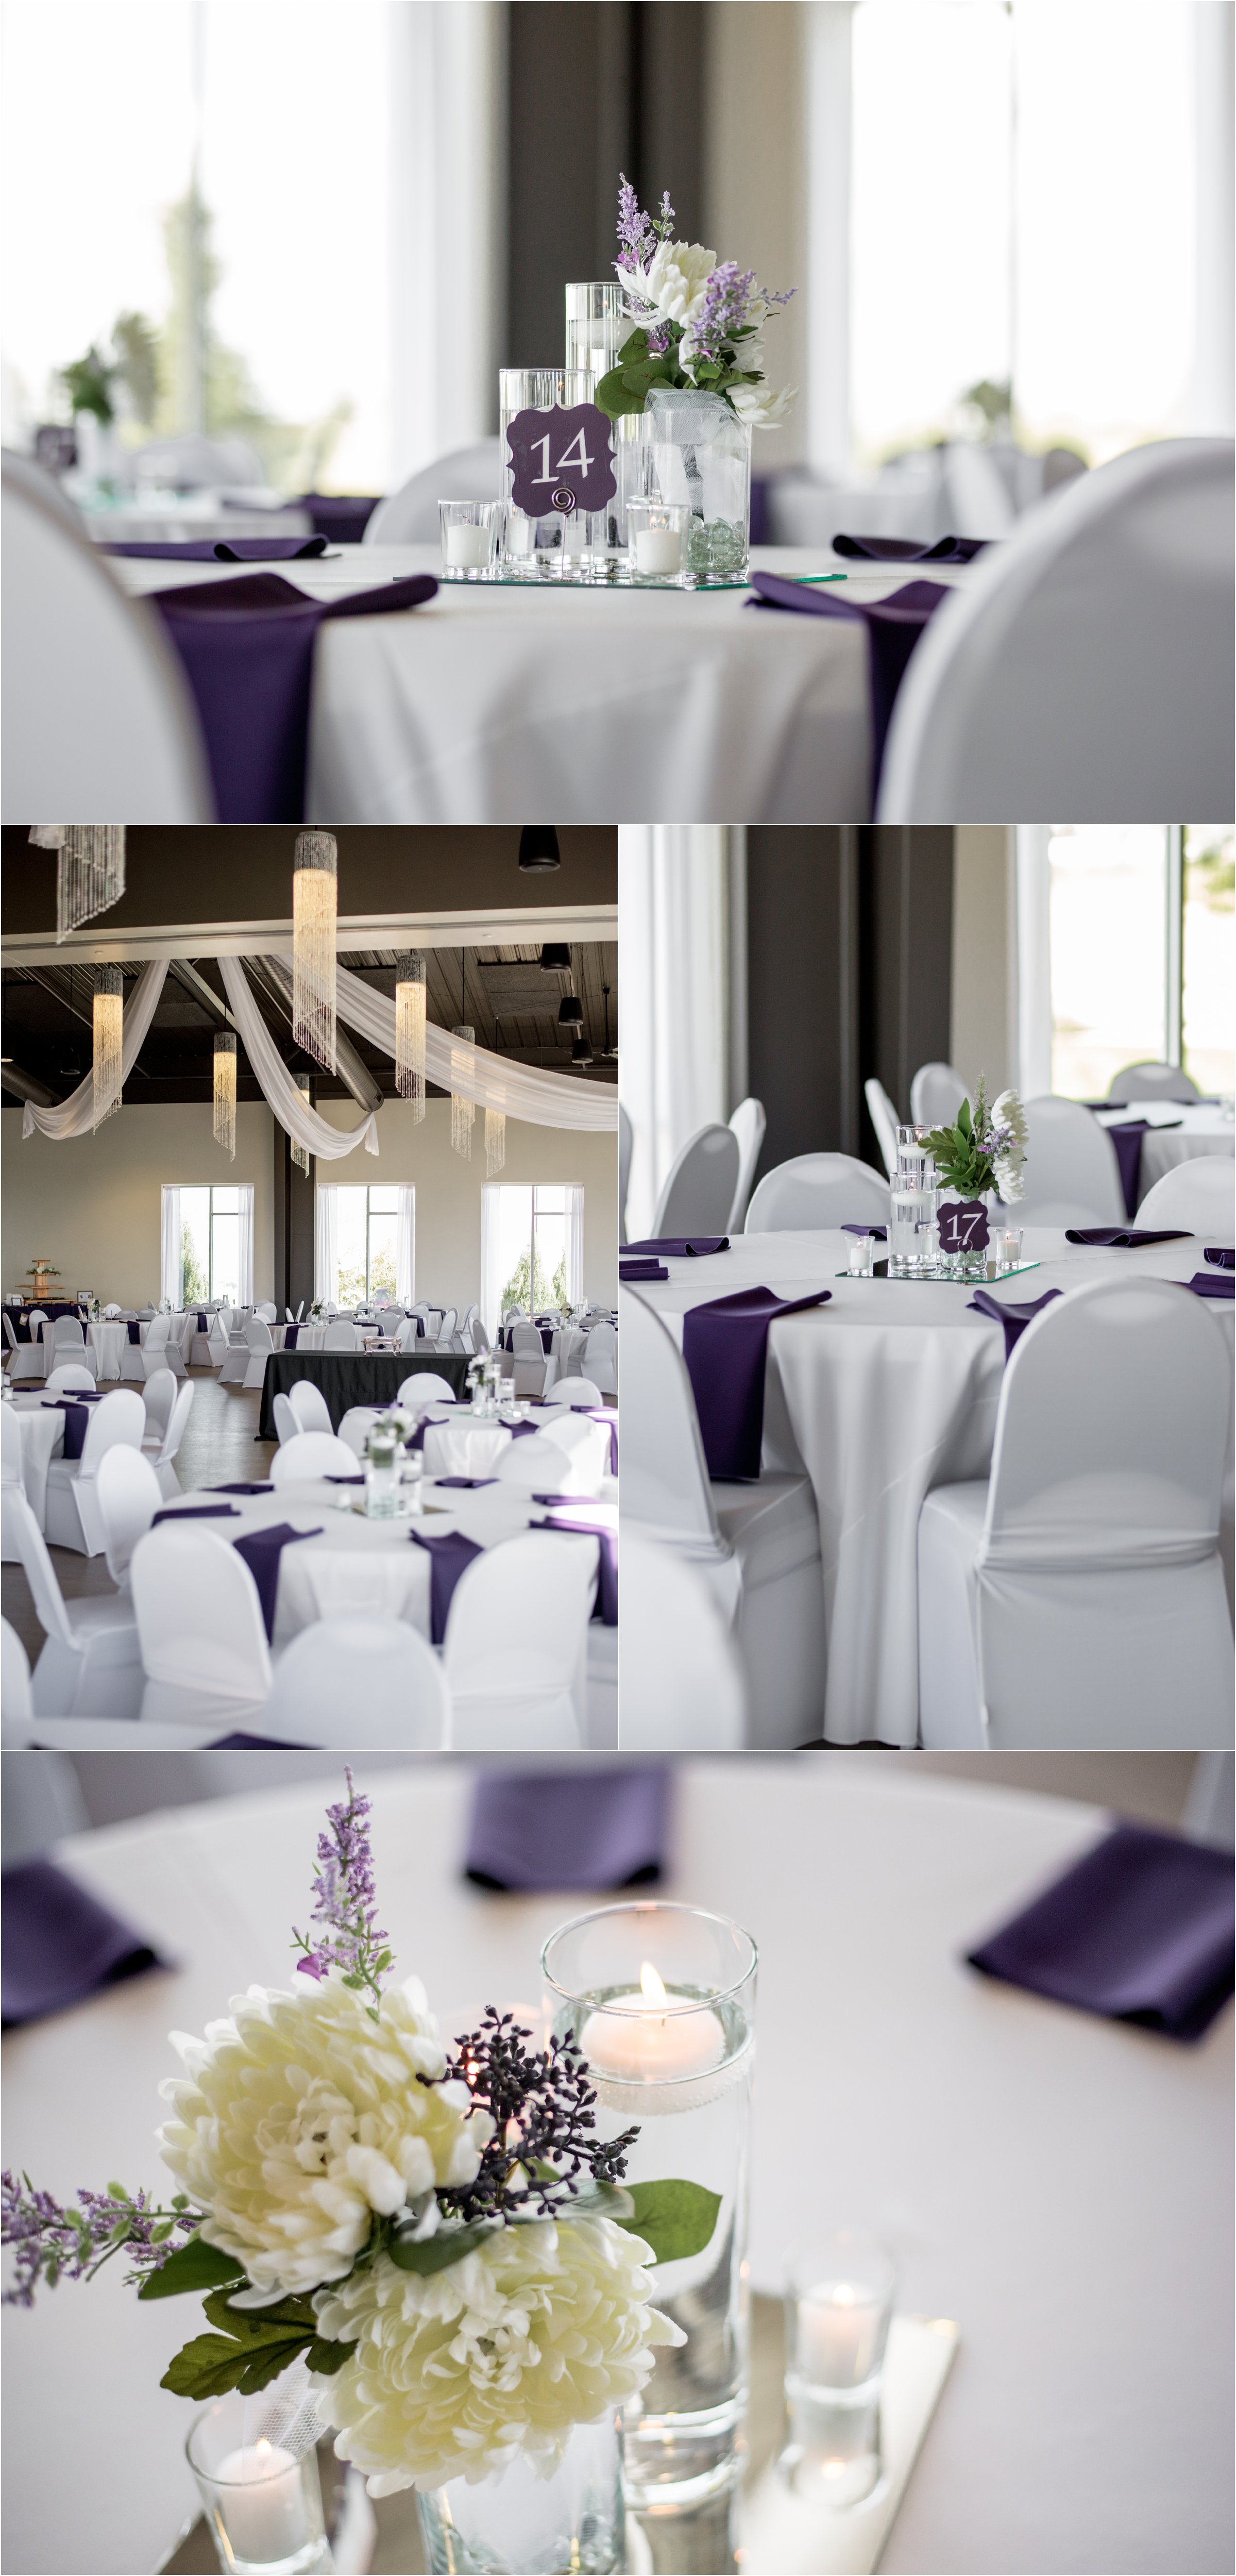 table decorations of white and purple flowers at the windson estate event center